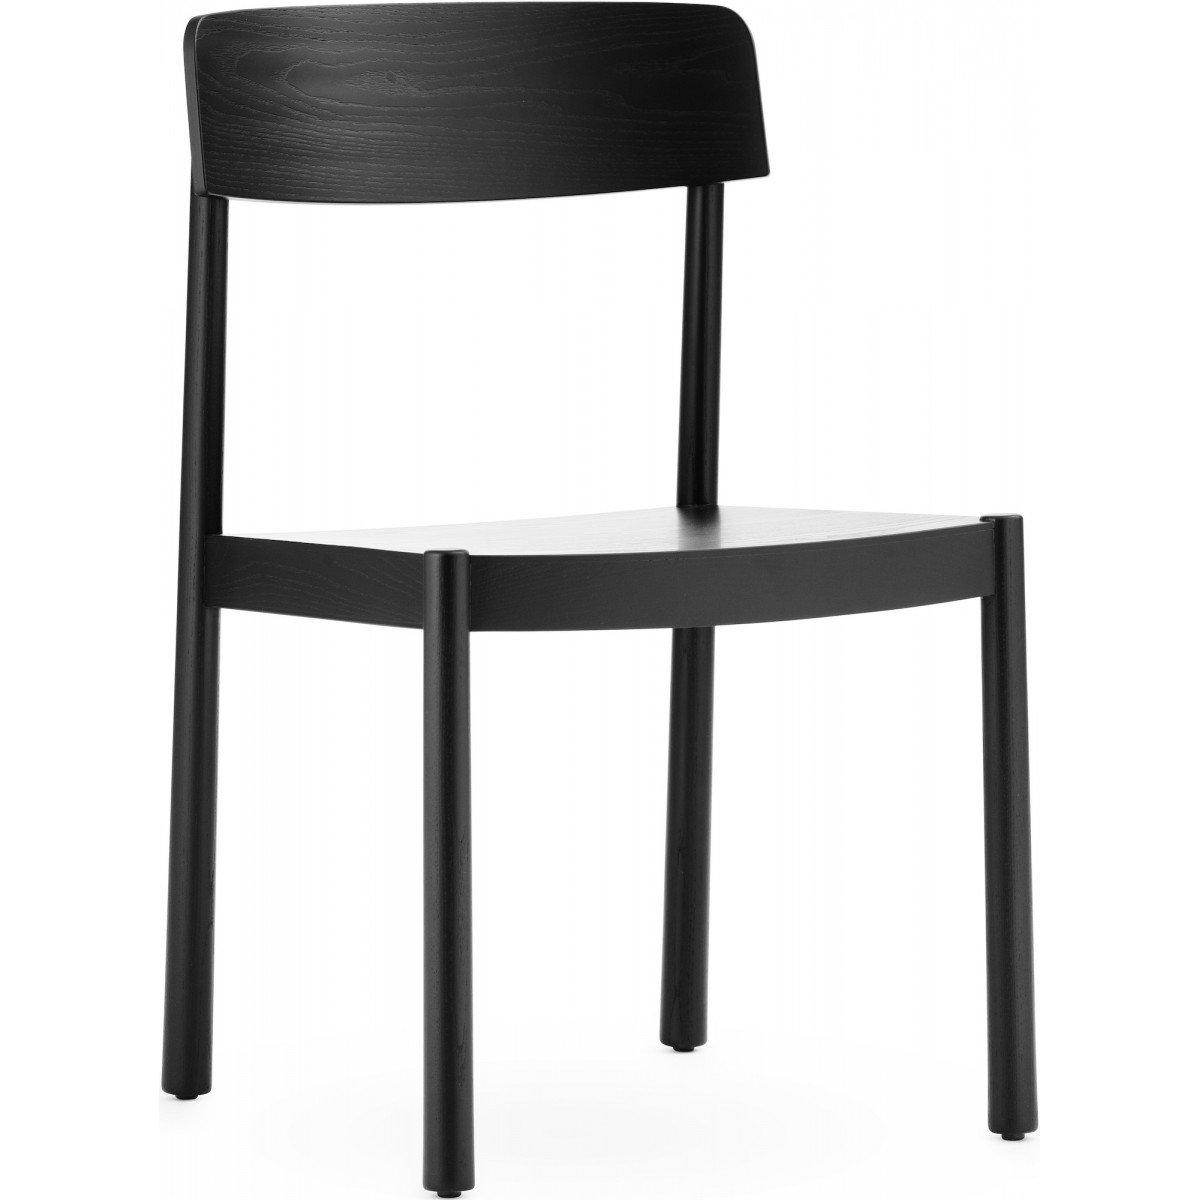 Black lacquered ash – Timb Chair